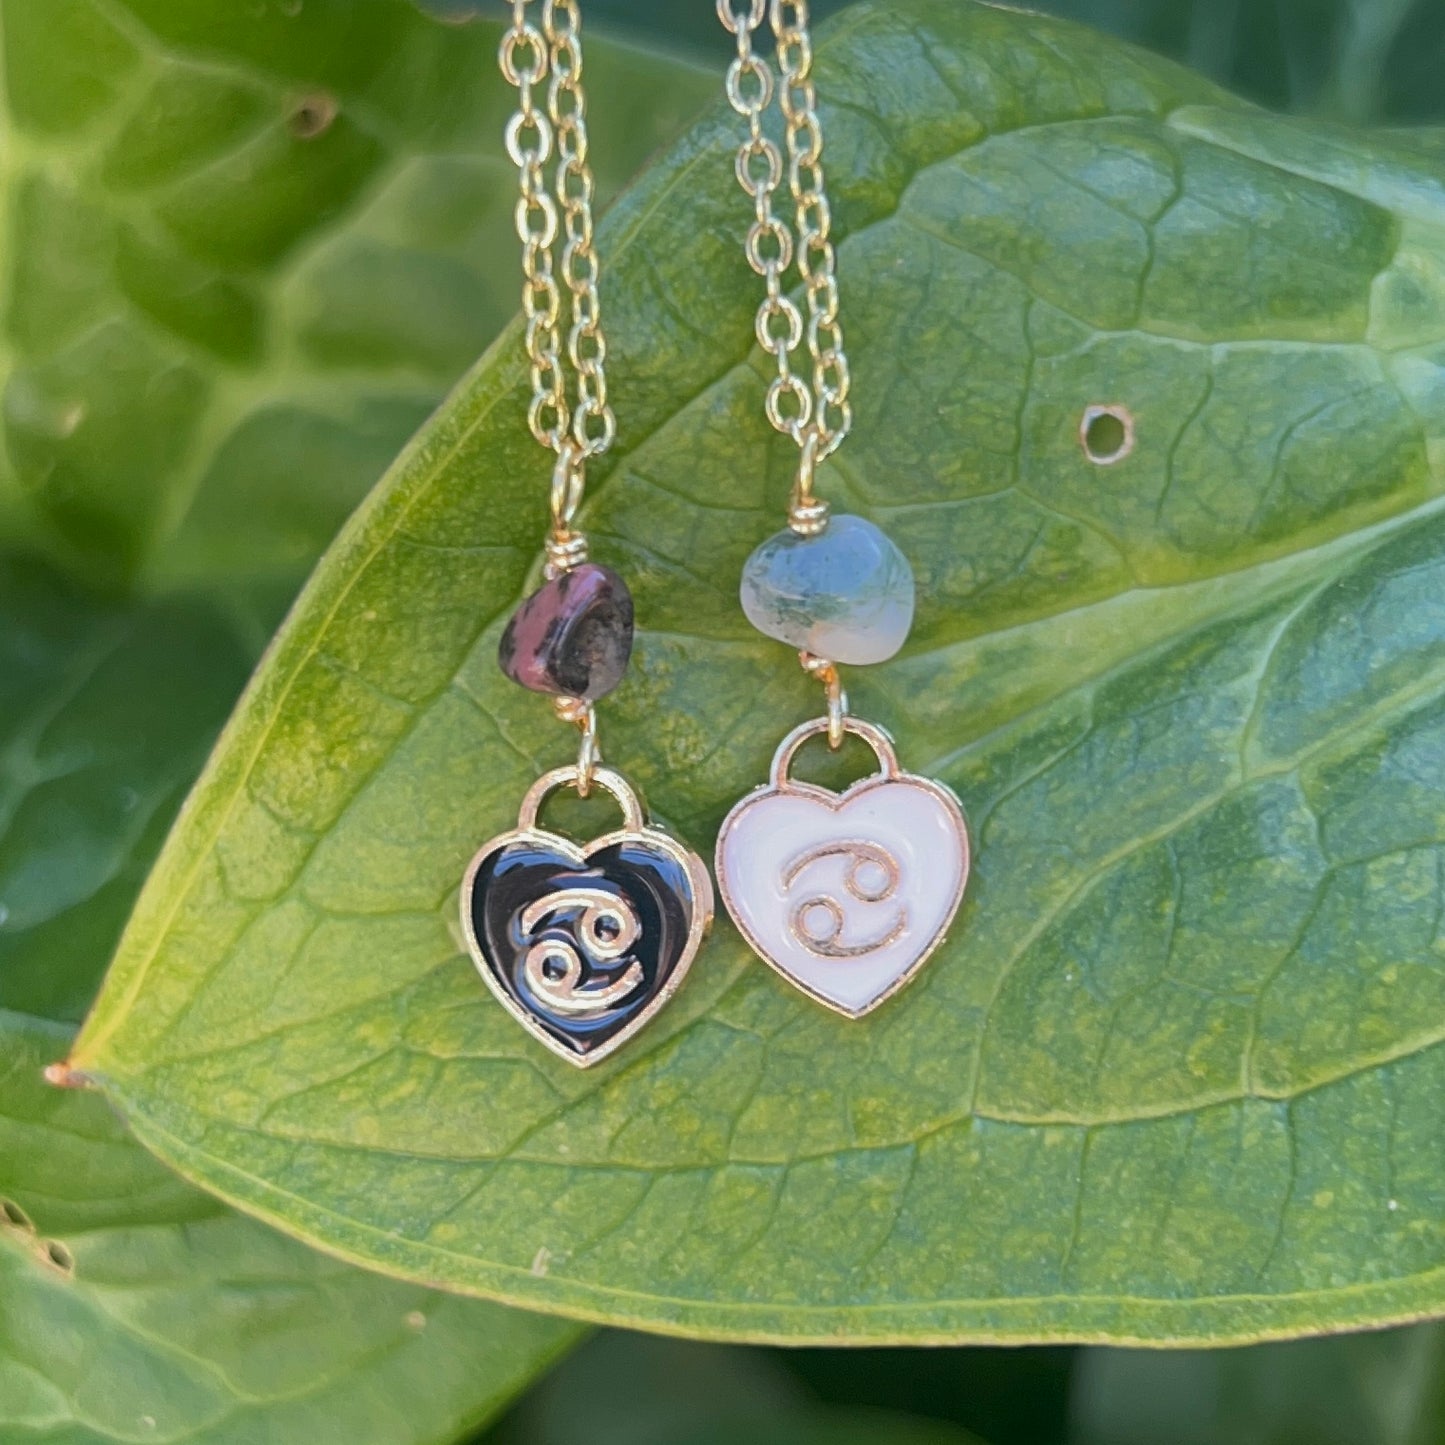 Cancer Charm Necklaces